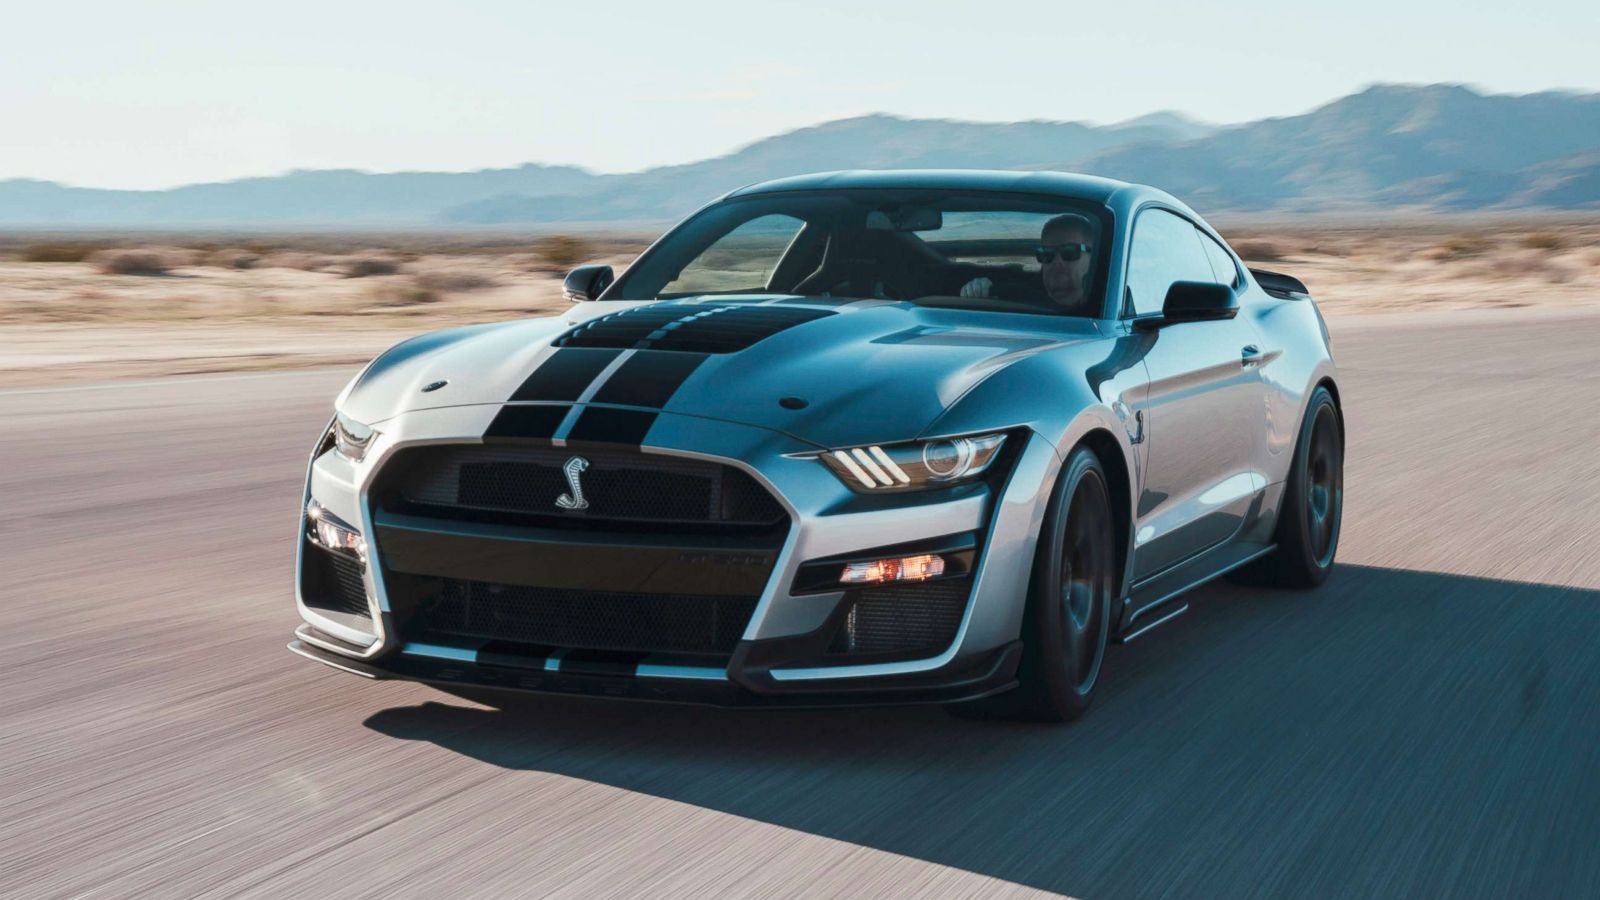 Ford debuts the 2020 Mustang Shelby GT500, its most powerful street-legal  car, at Detroit auto show - ABC News